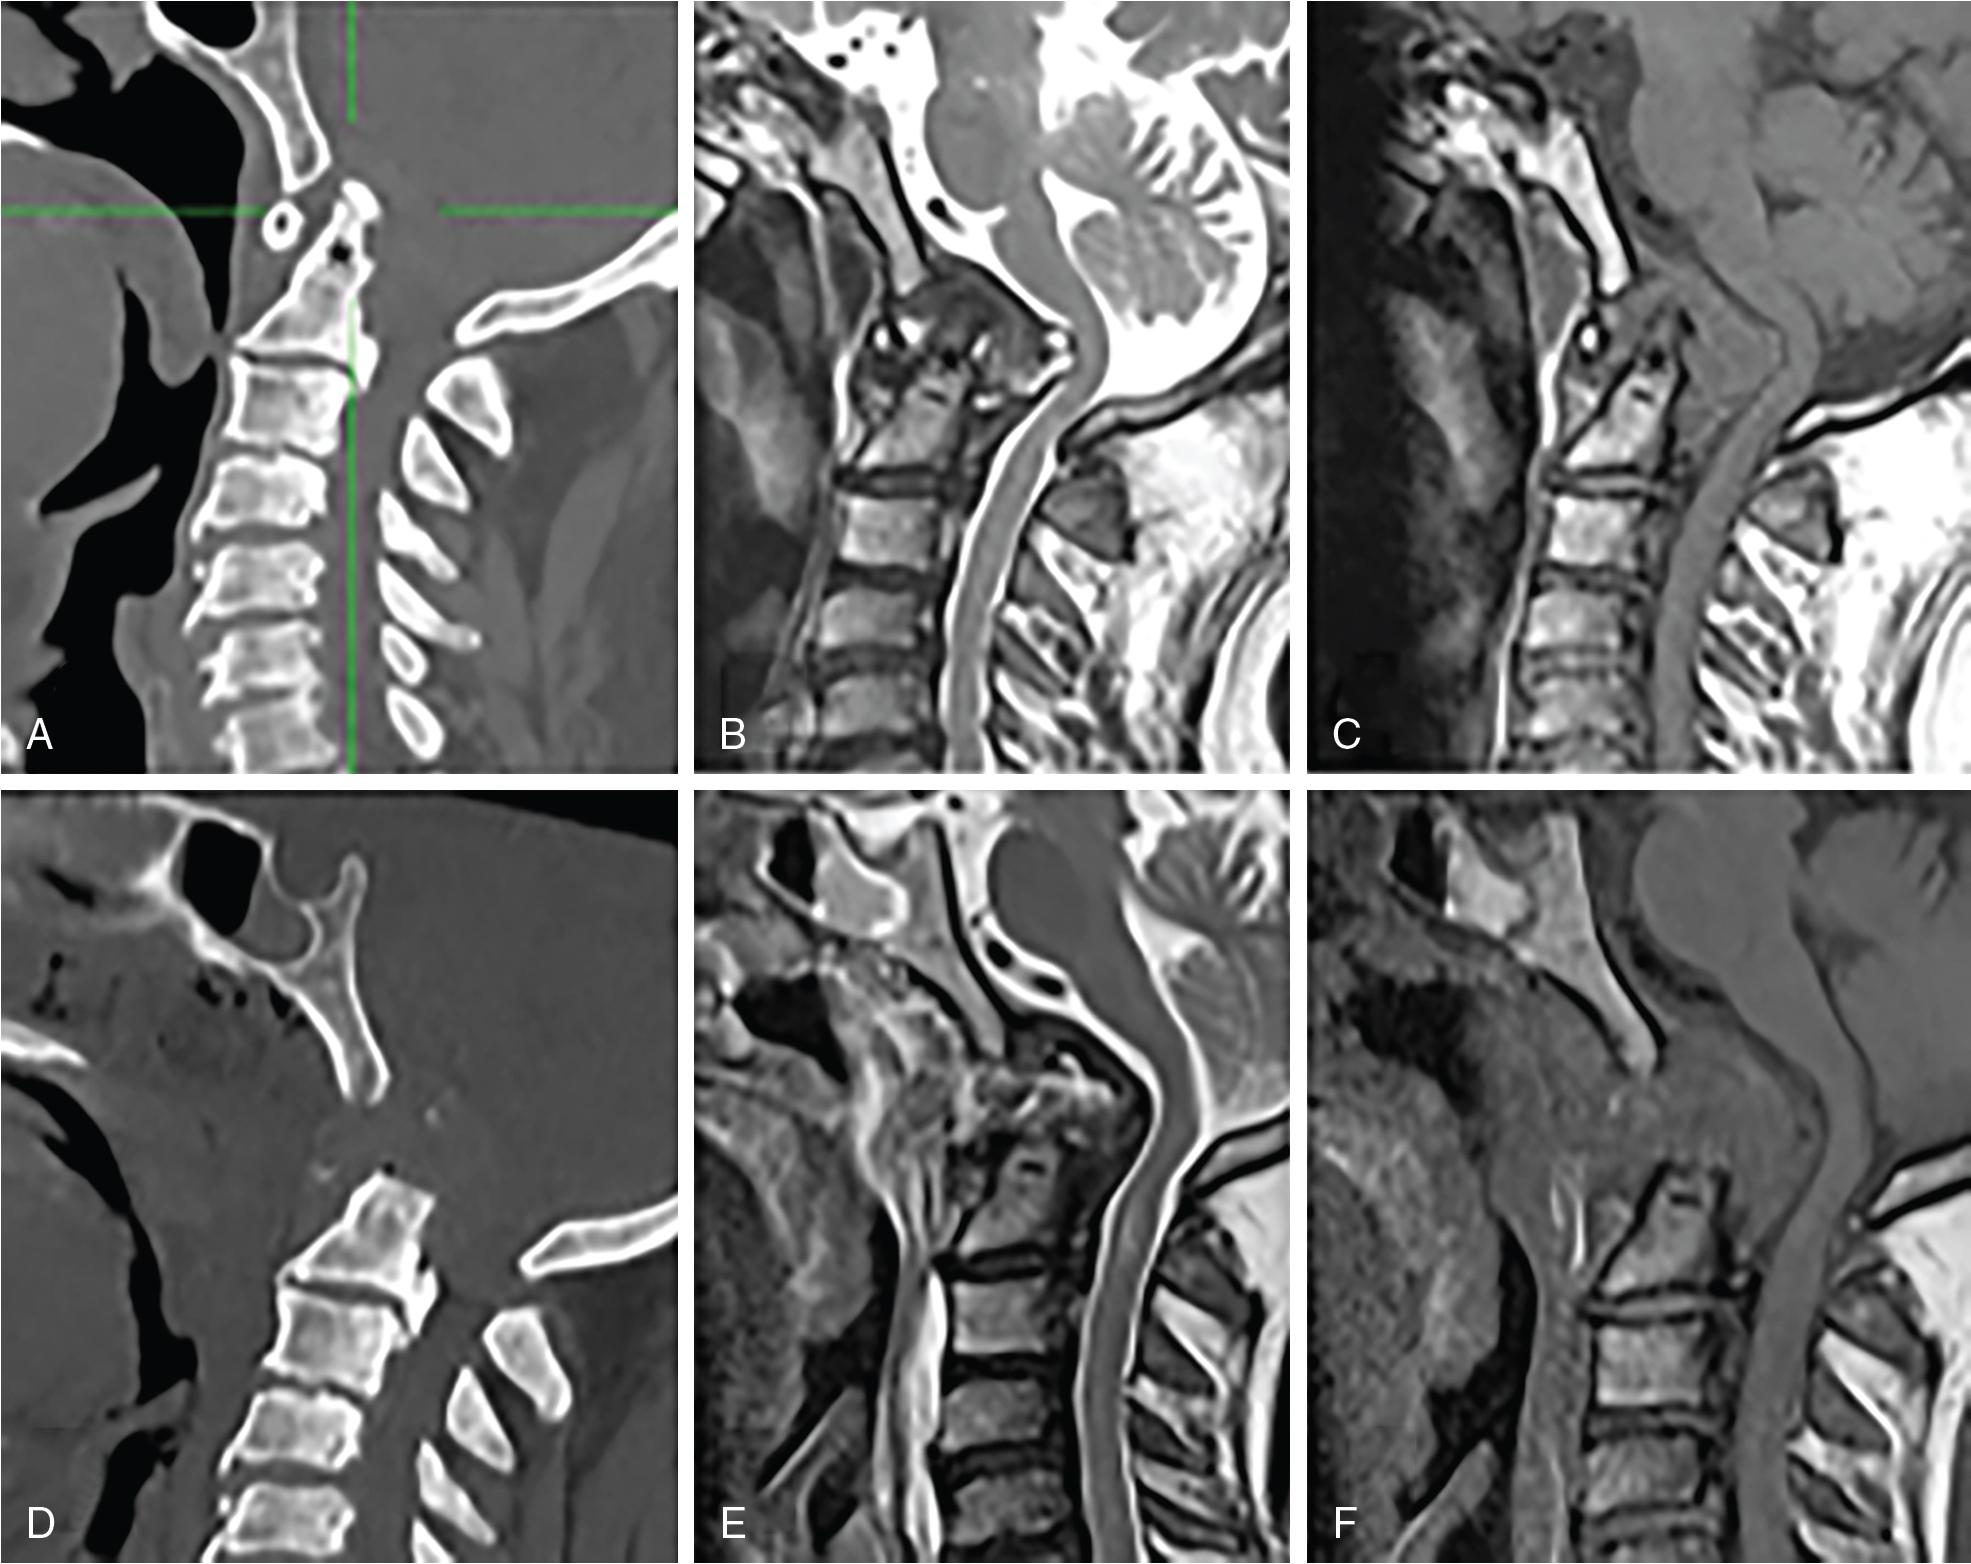 Fig. 35.3, Preoperative computed tomography (CT) scan ( A ), T2-weighted ( B) and contrast-enhanced T1-weighted ( C ) and postoperative CT scans ( E ), T2-weighted ( F ) and contrast-enhanced T1-weighted ( G ) magnetic resonance imaging of a craniovertebral junction malformation in a 74-year-old man with progressive cervical pain treated by an endoscopic transodontoid approach and a multilayer skull base reconstruction with an inferiorly based retropharyngeal mucosal flap.